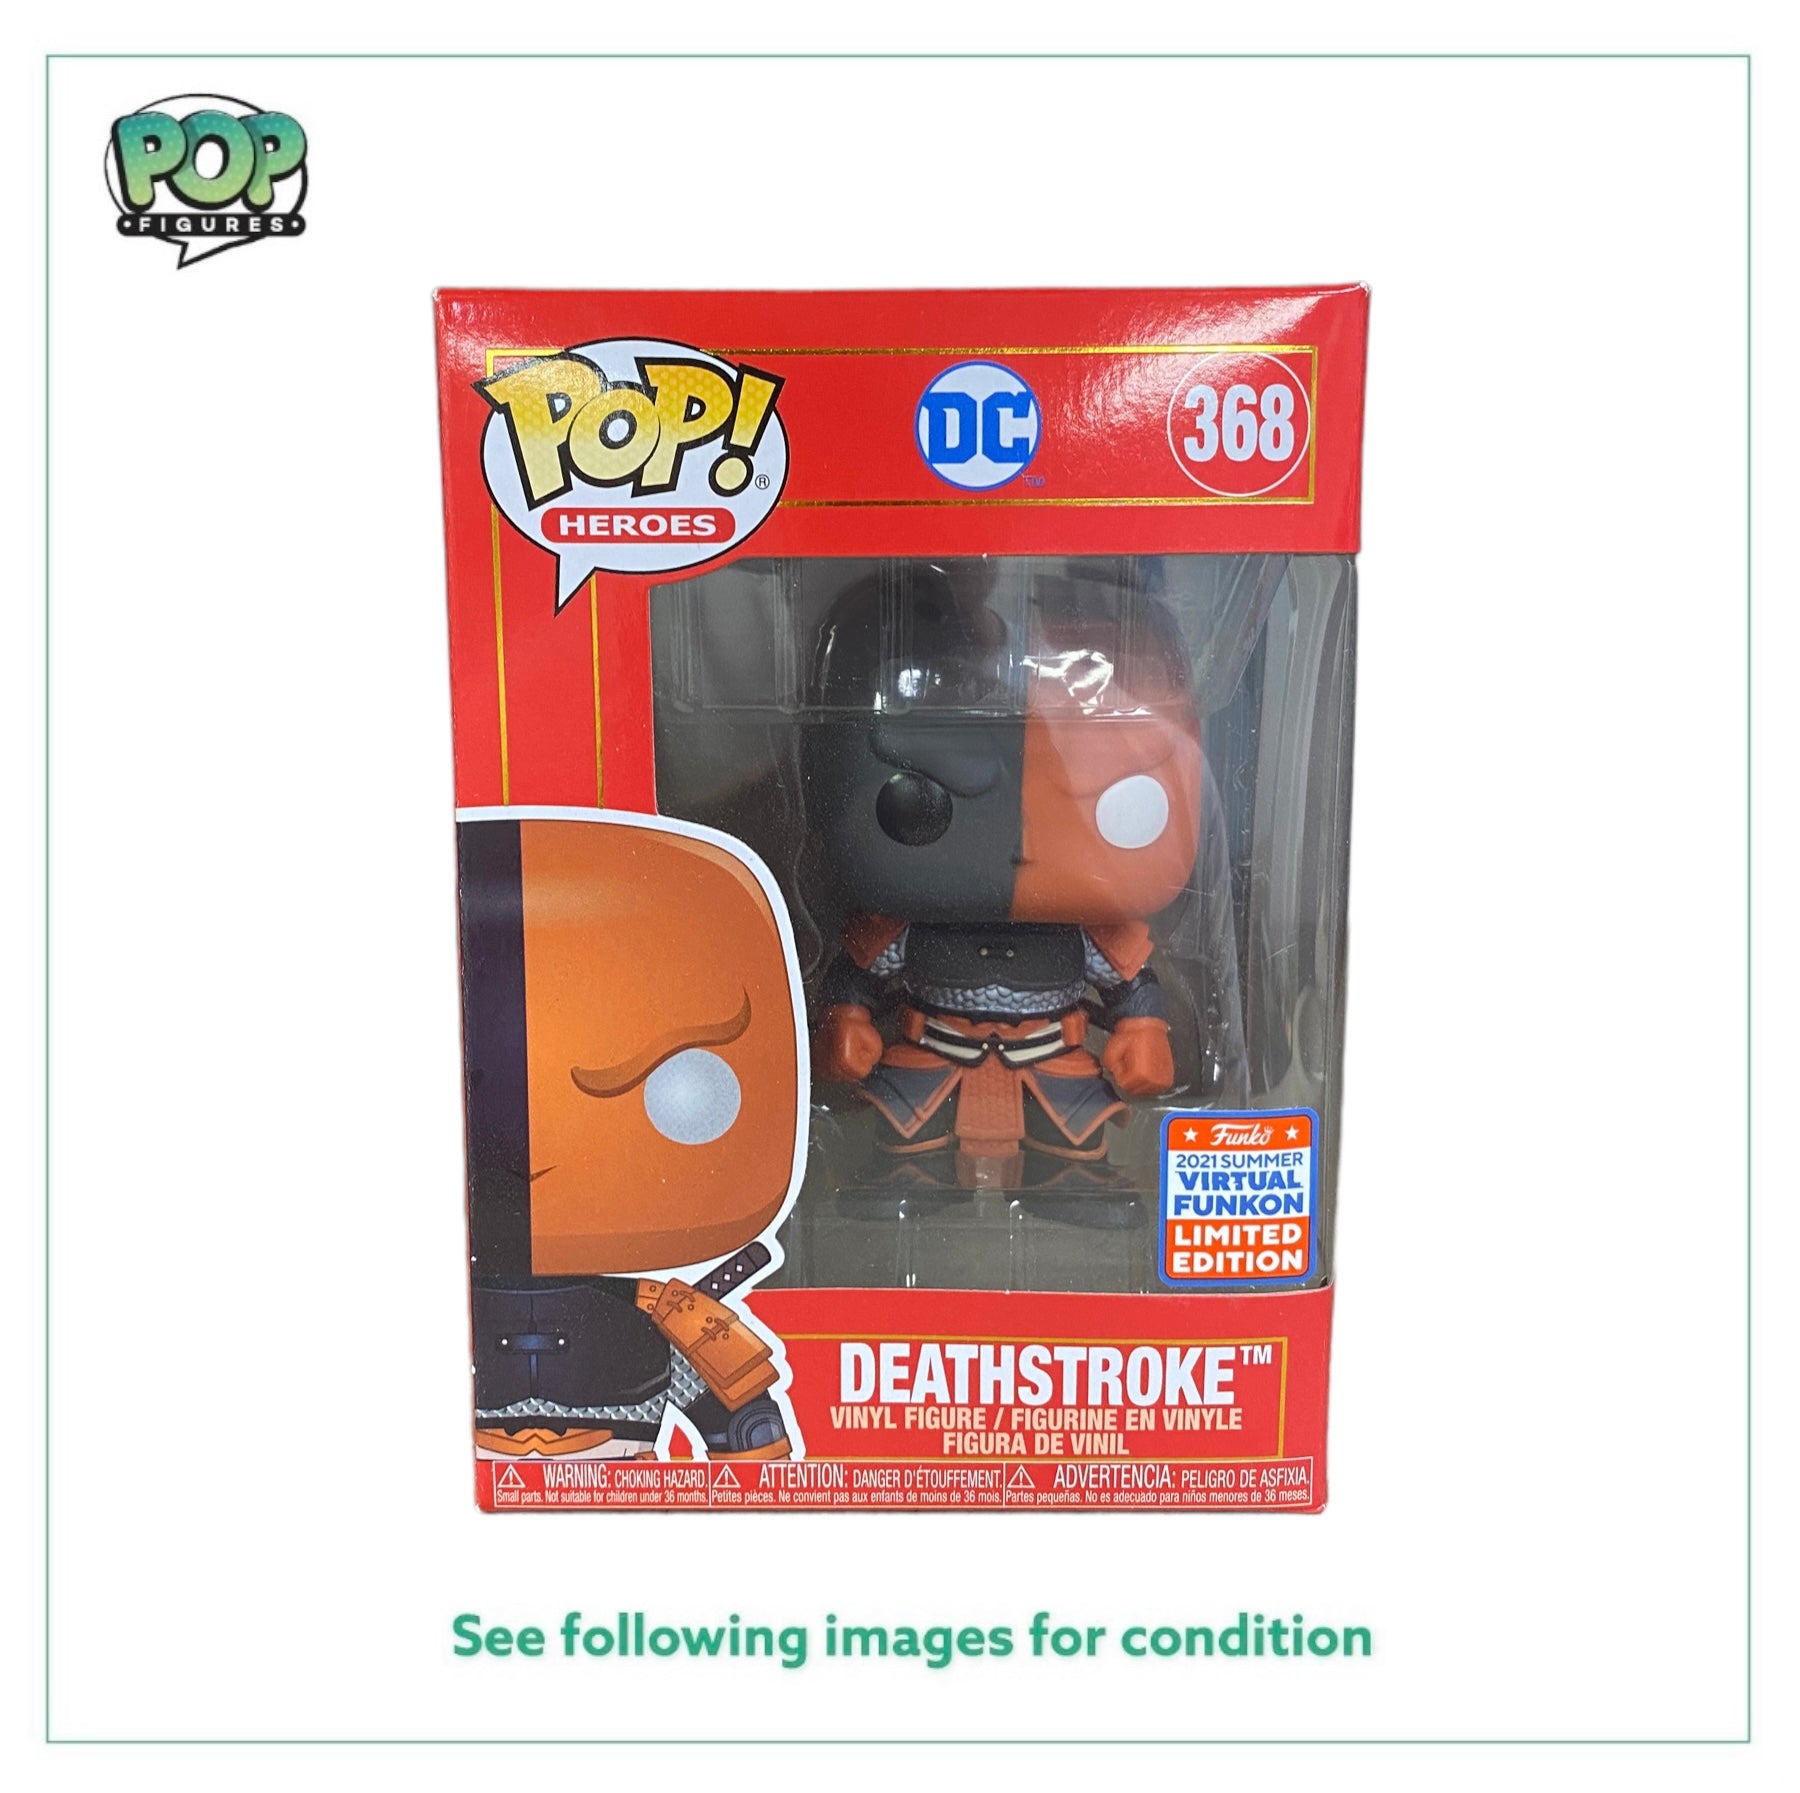 Deathstroke #368 Funko Pop! - DC Imperial Palace - Virtual Funkon 2021 Official Convention Exclusive - Condition 9.5/10